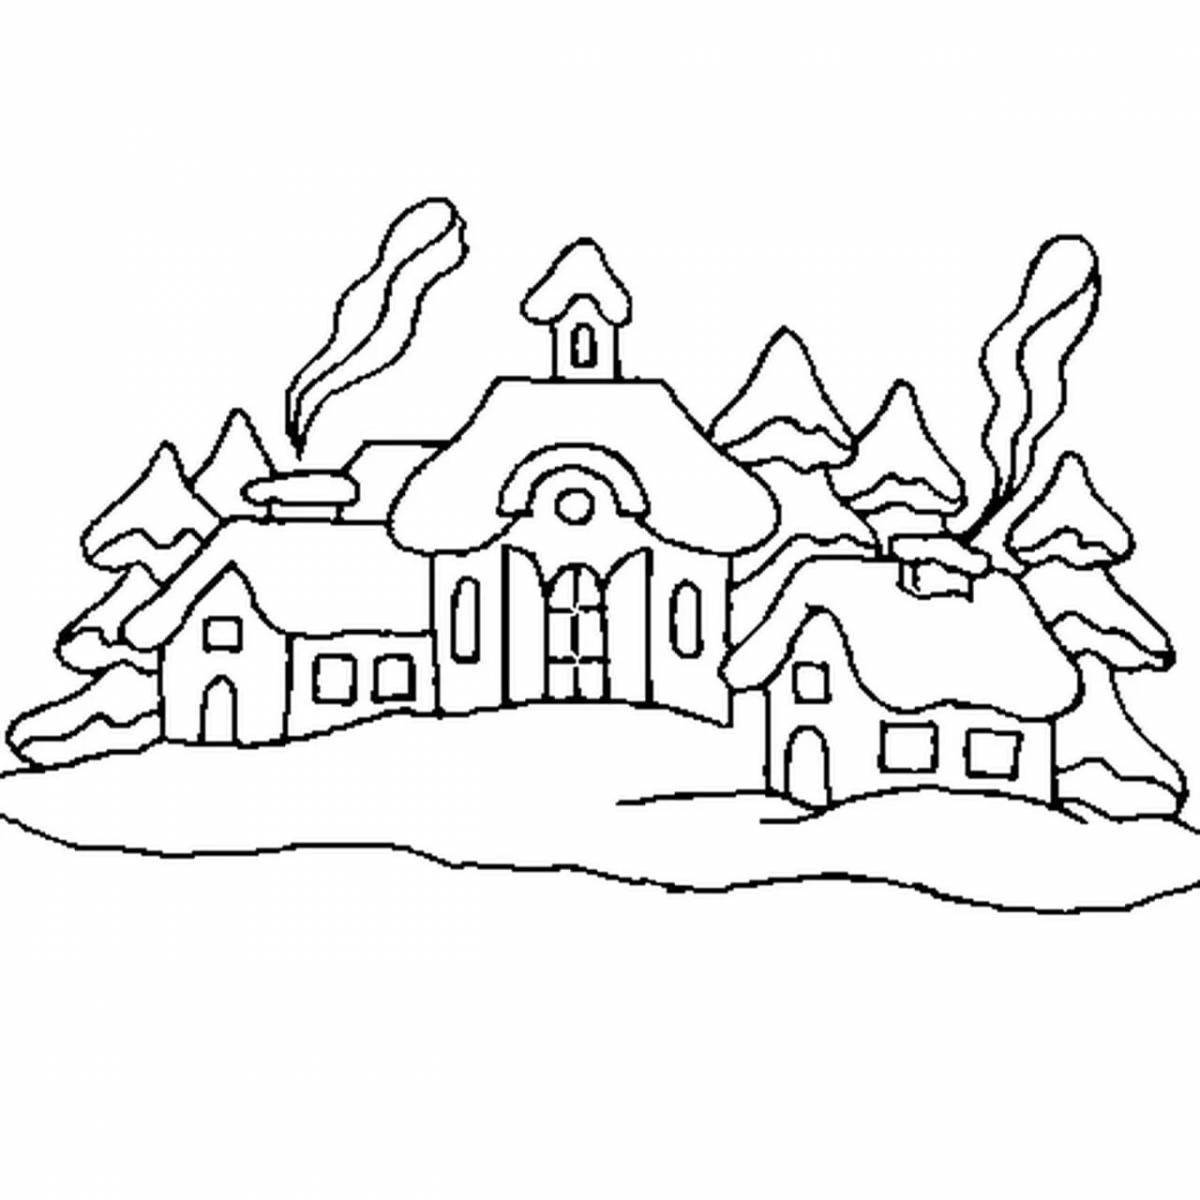 Coloring page picturesque winter village